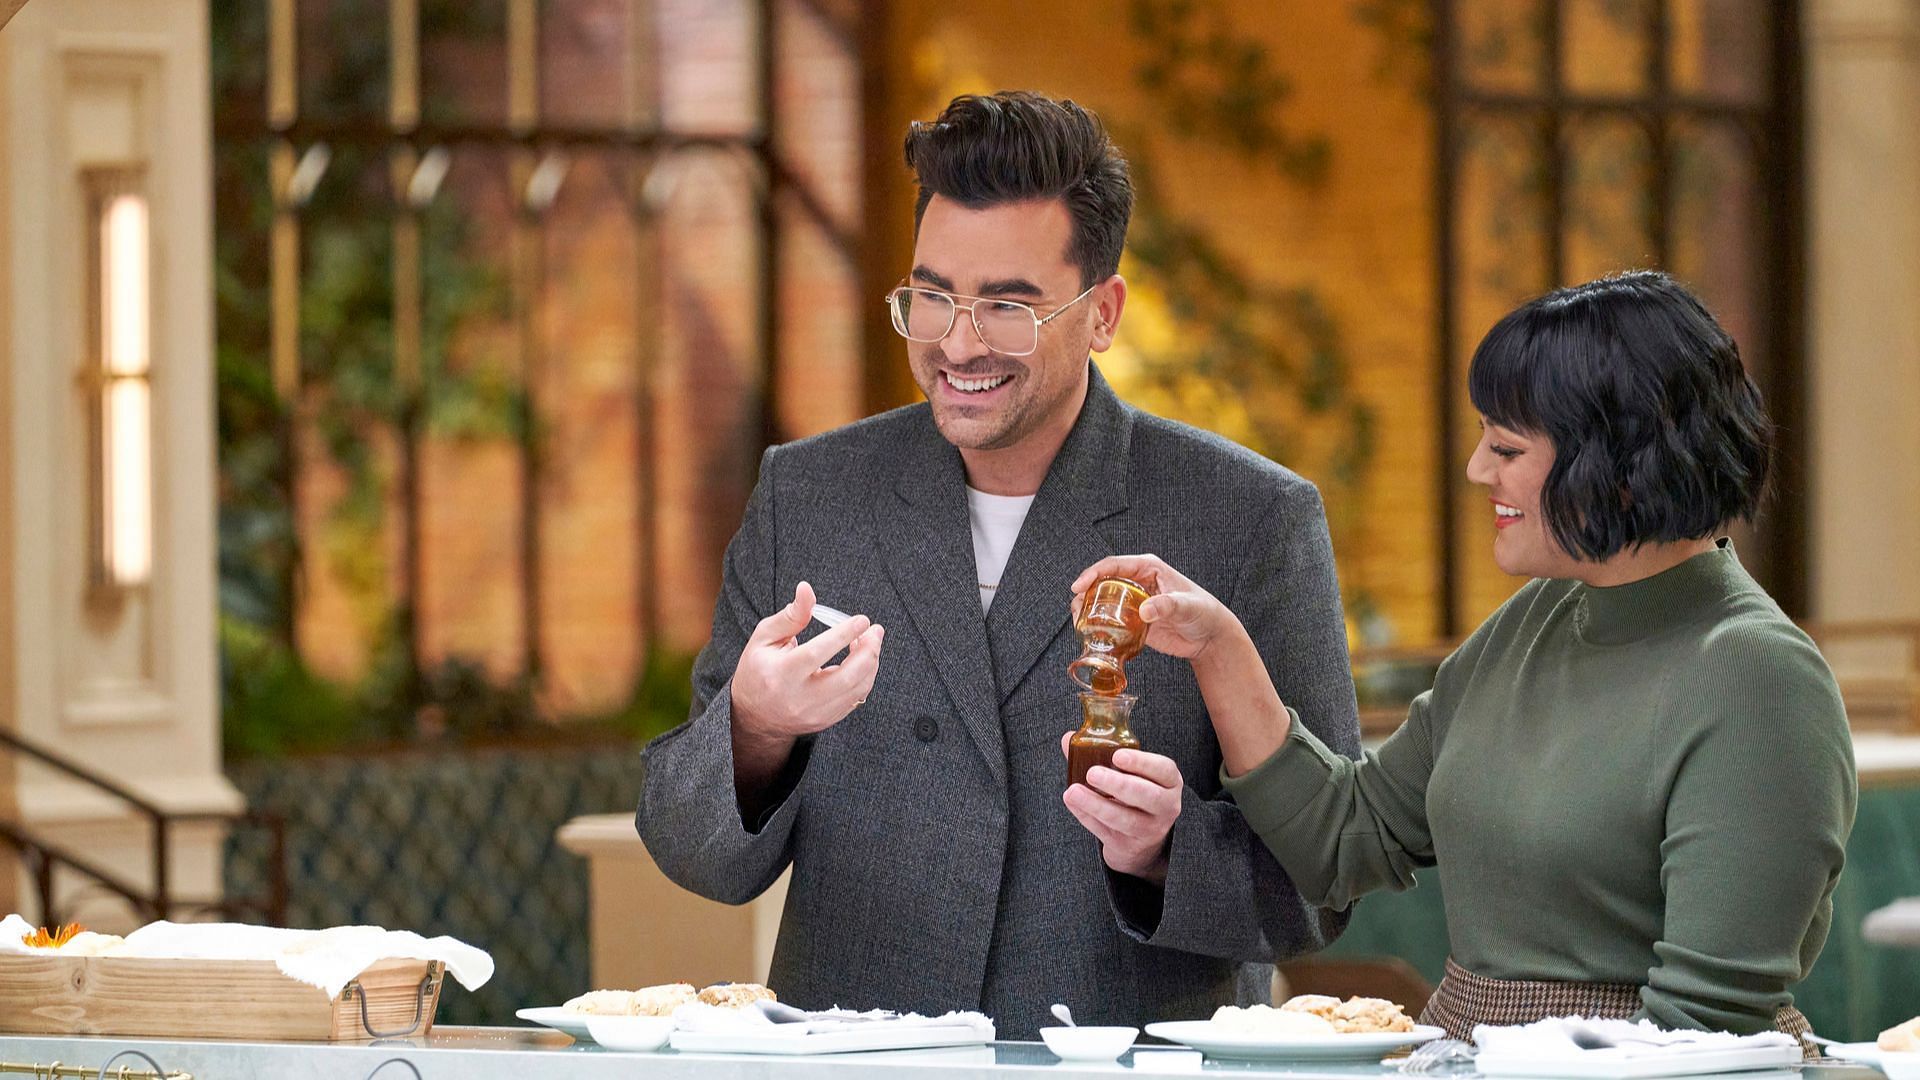 Dan Levy to serve as host of The Big Brunch